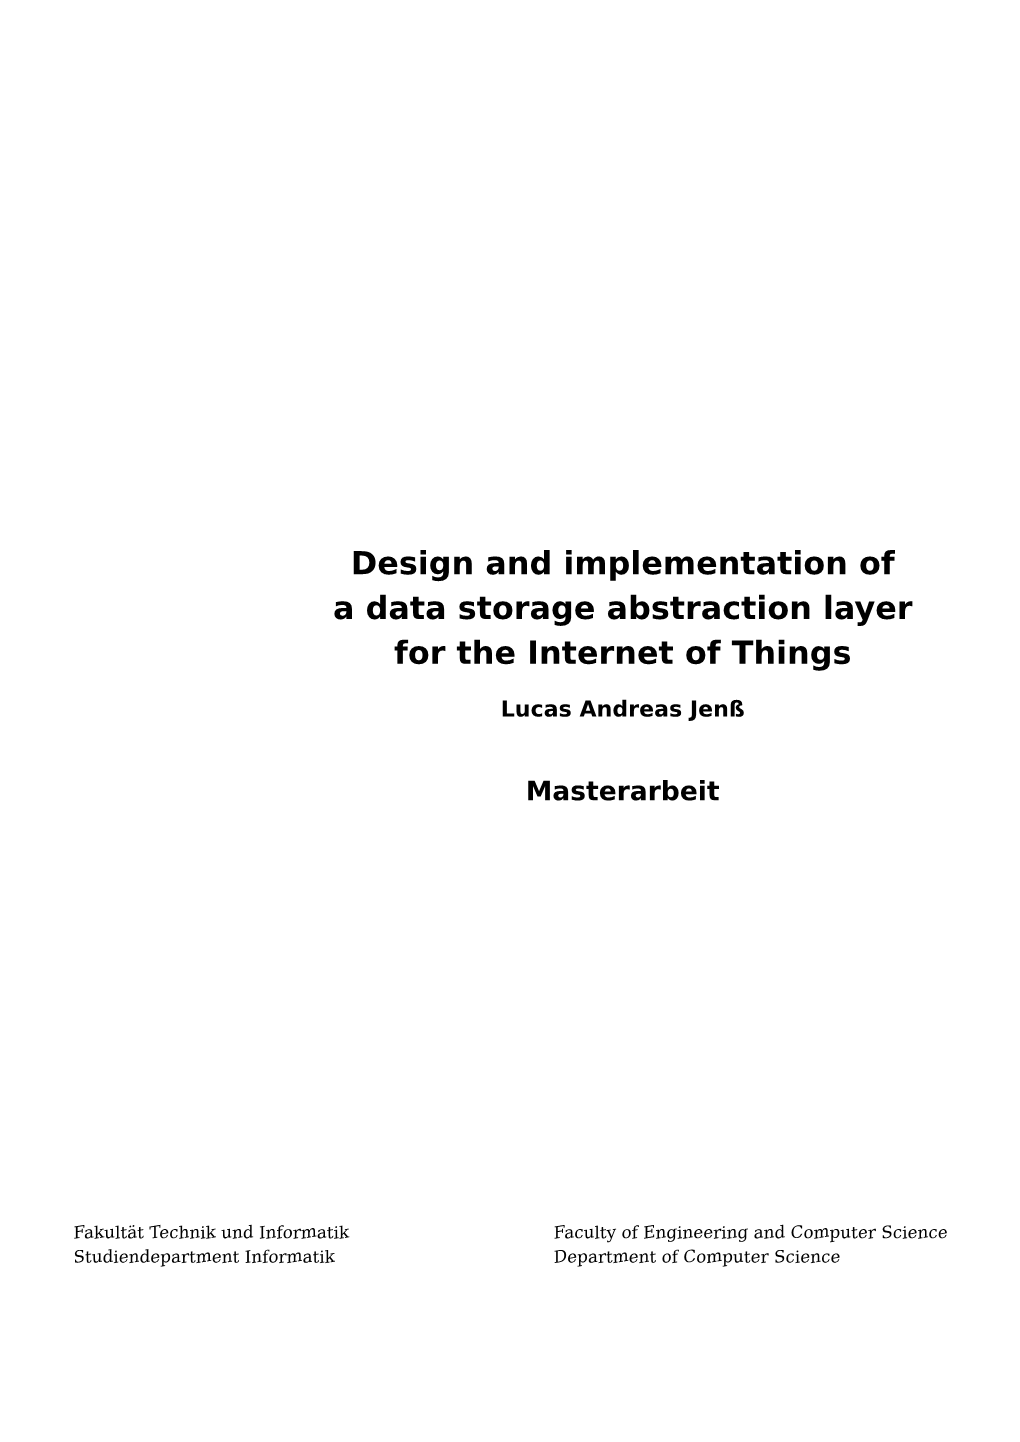 Design and Implementation of a Data Storage Abstraction Layer for the Internet of Things